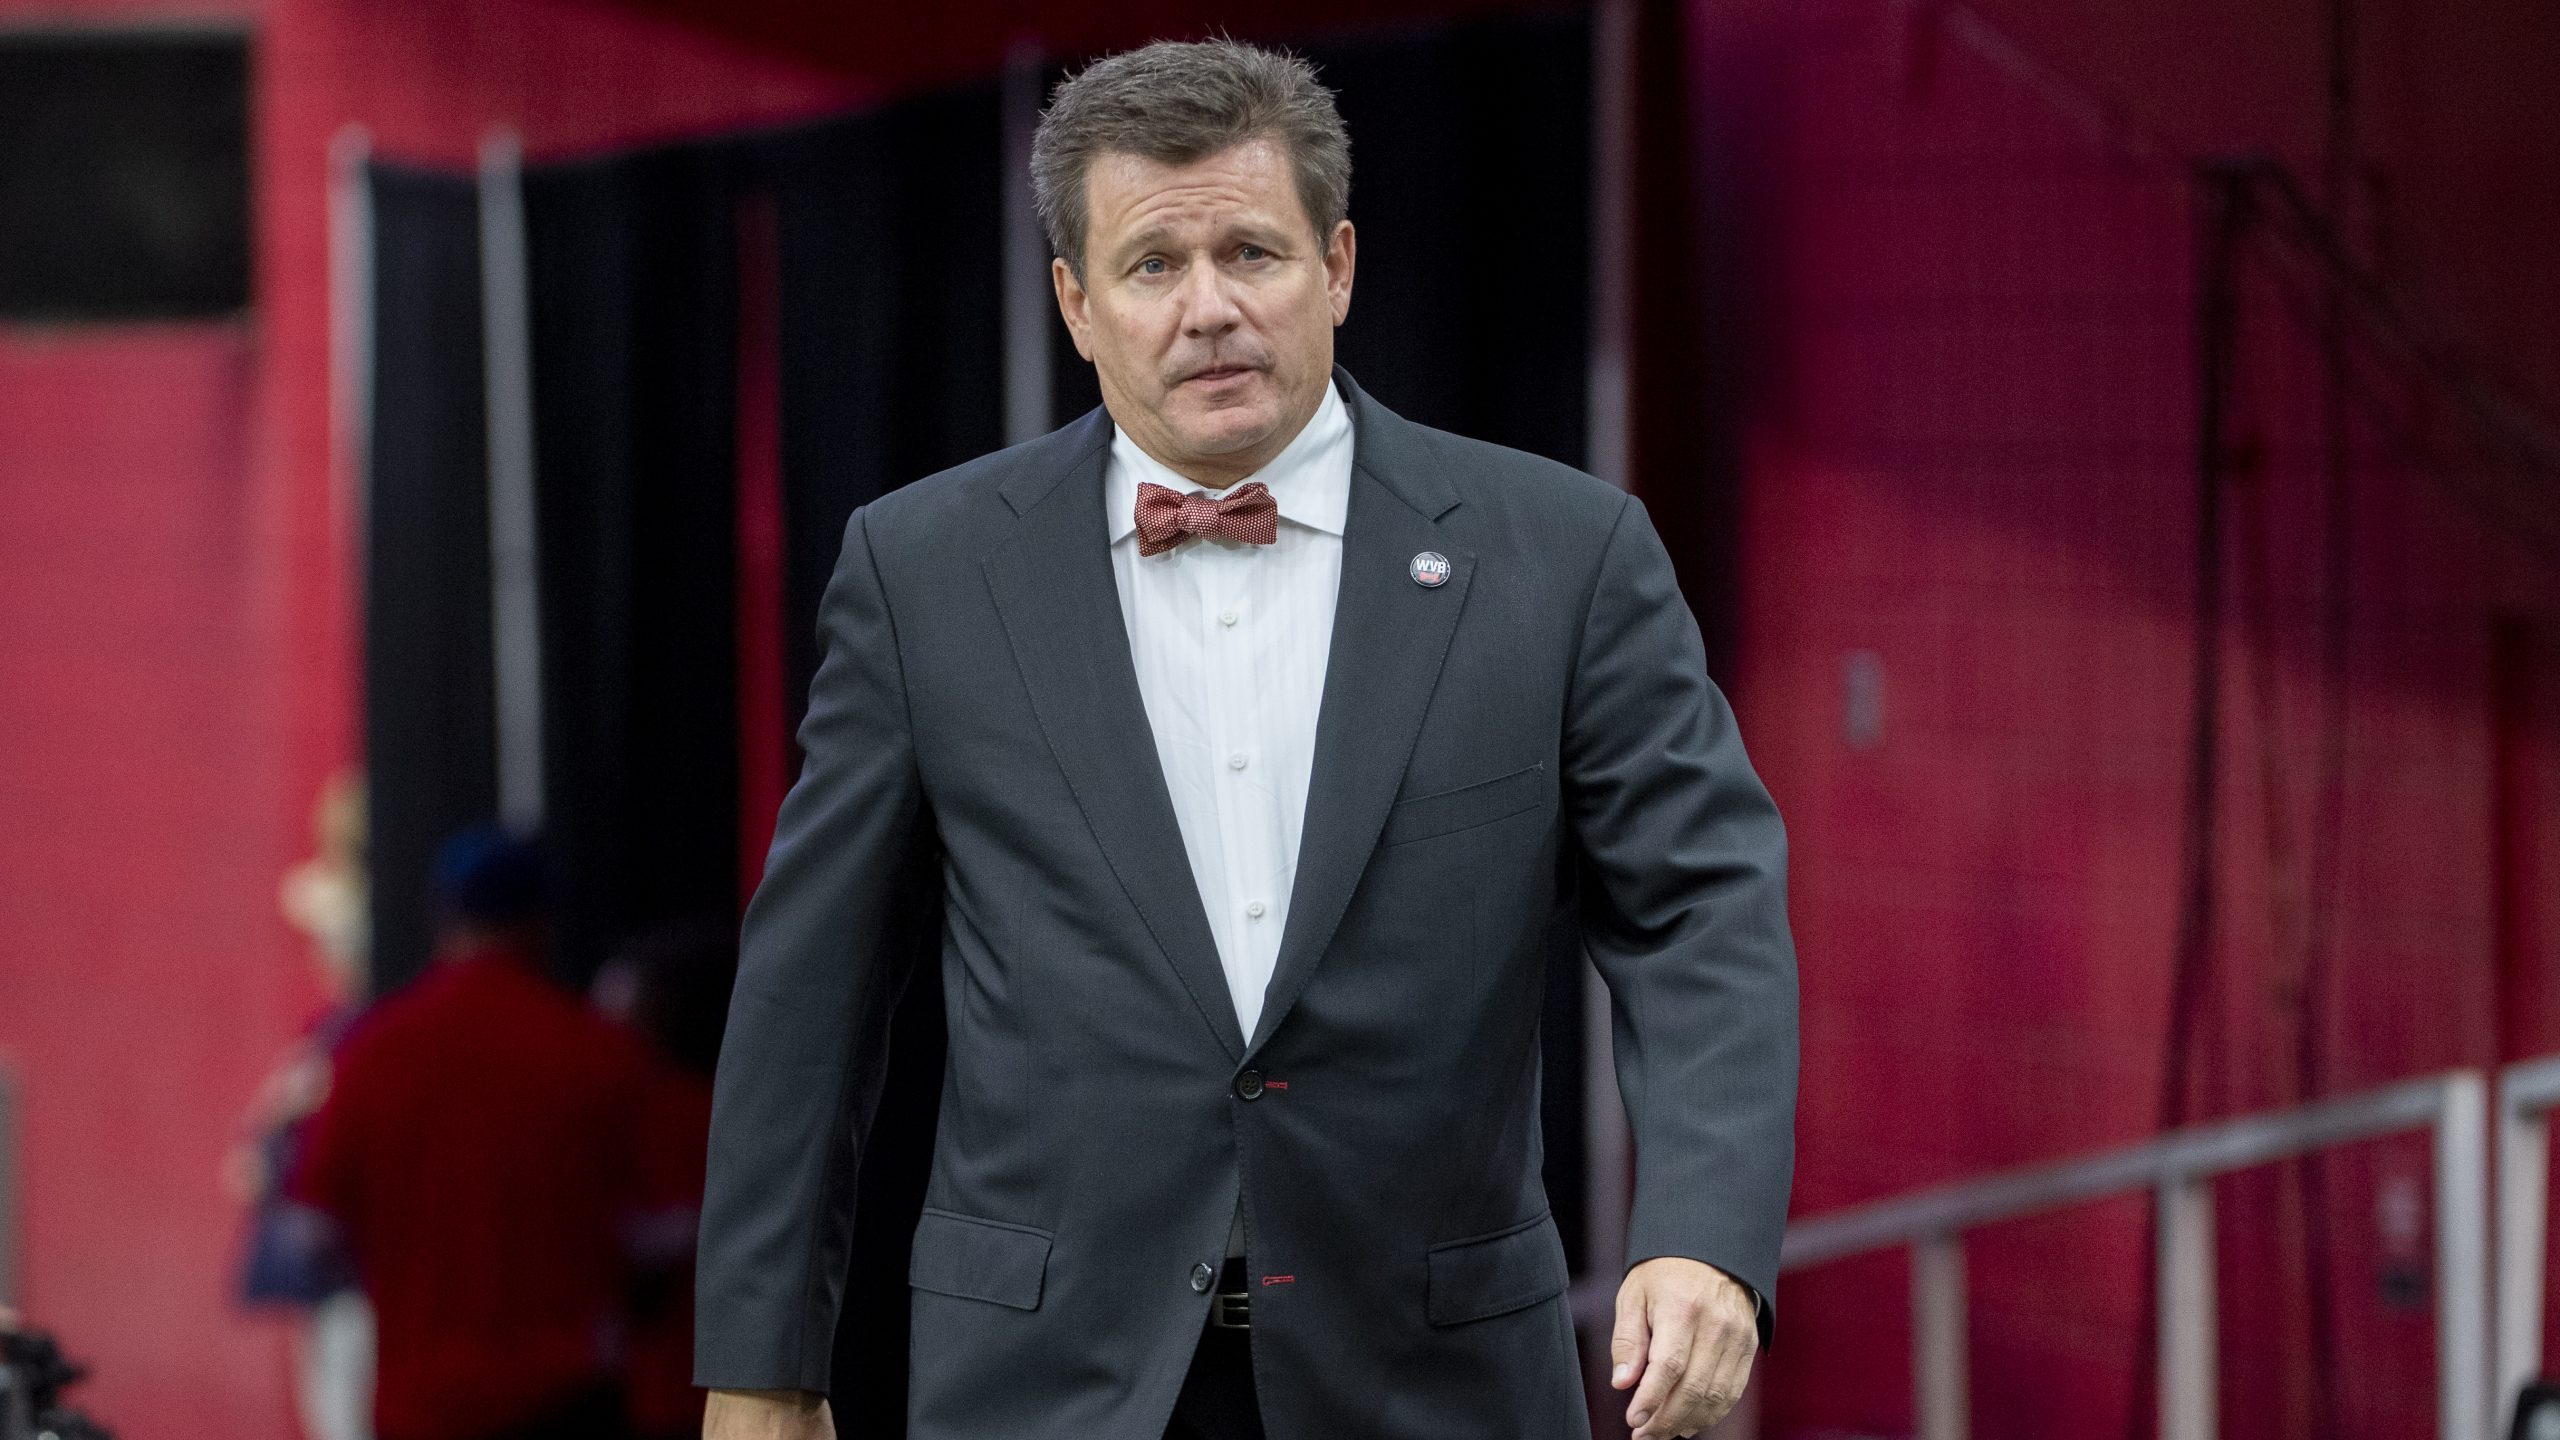 Arizona Cardinals president Michael Bidwill walks onto the field prior to the NFL game between the ...